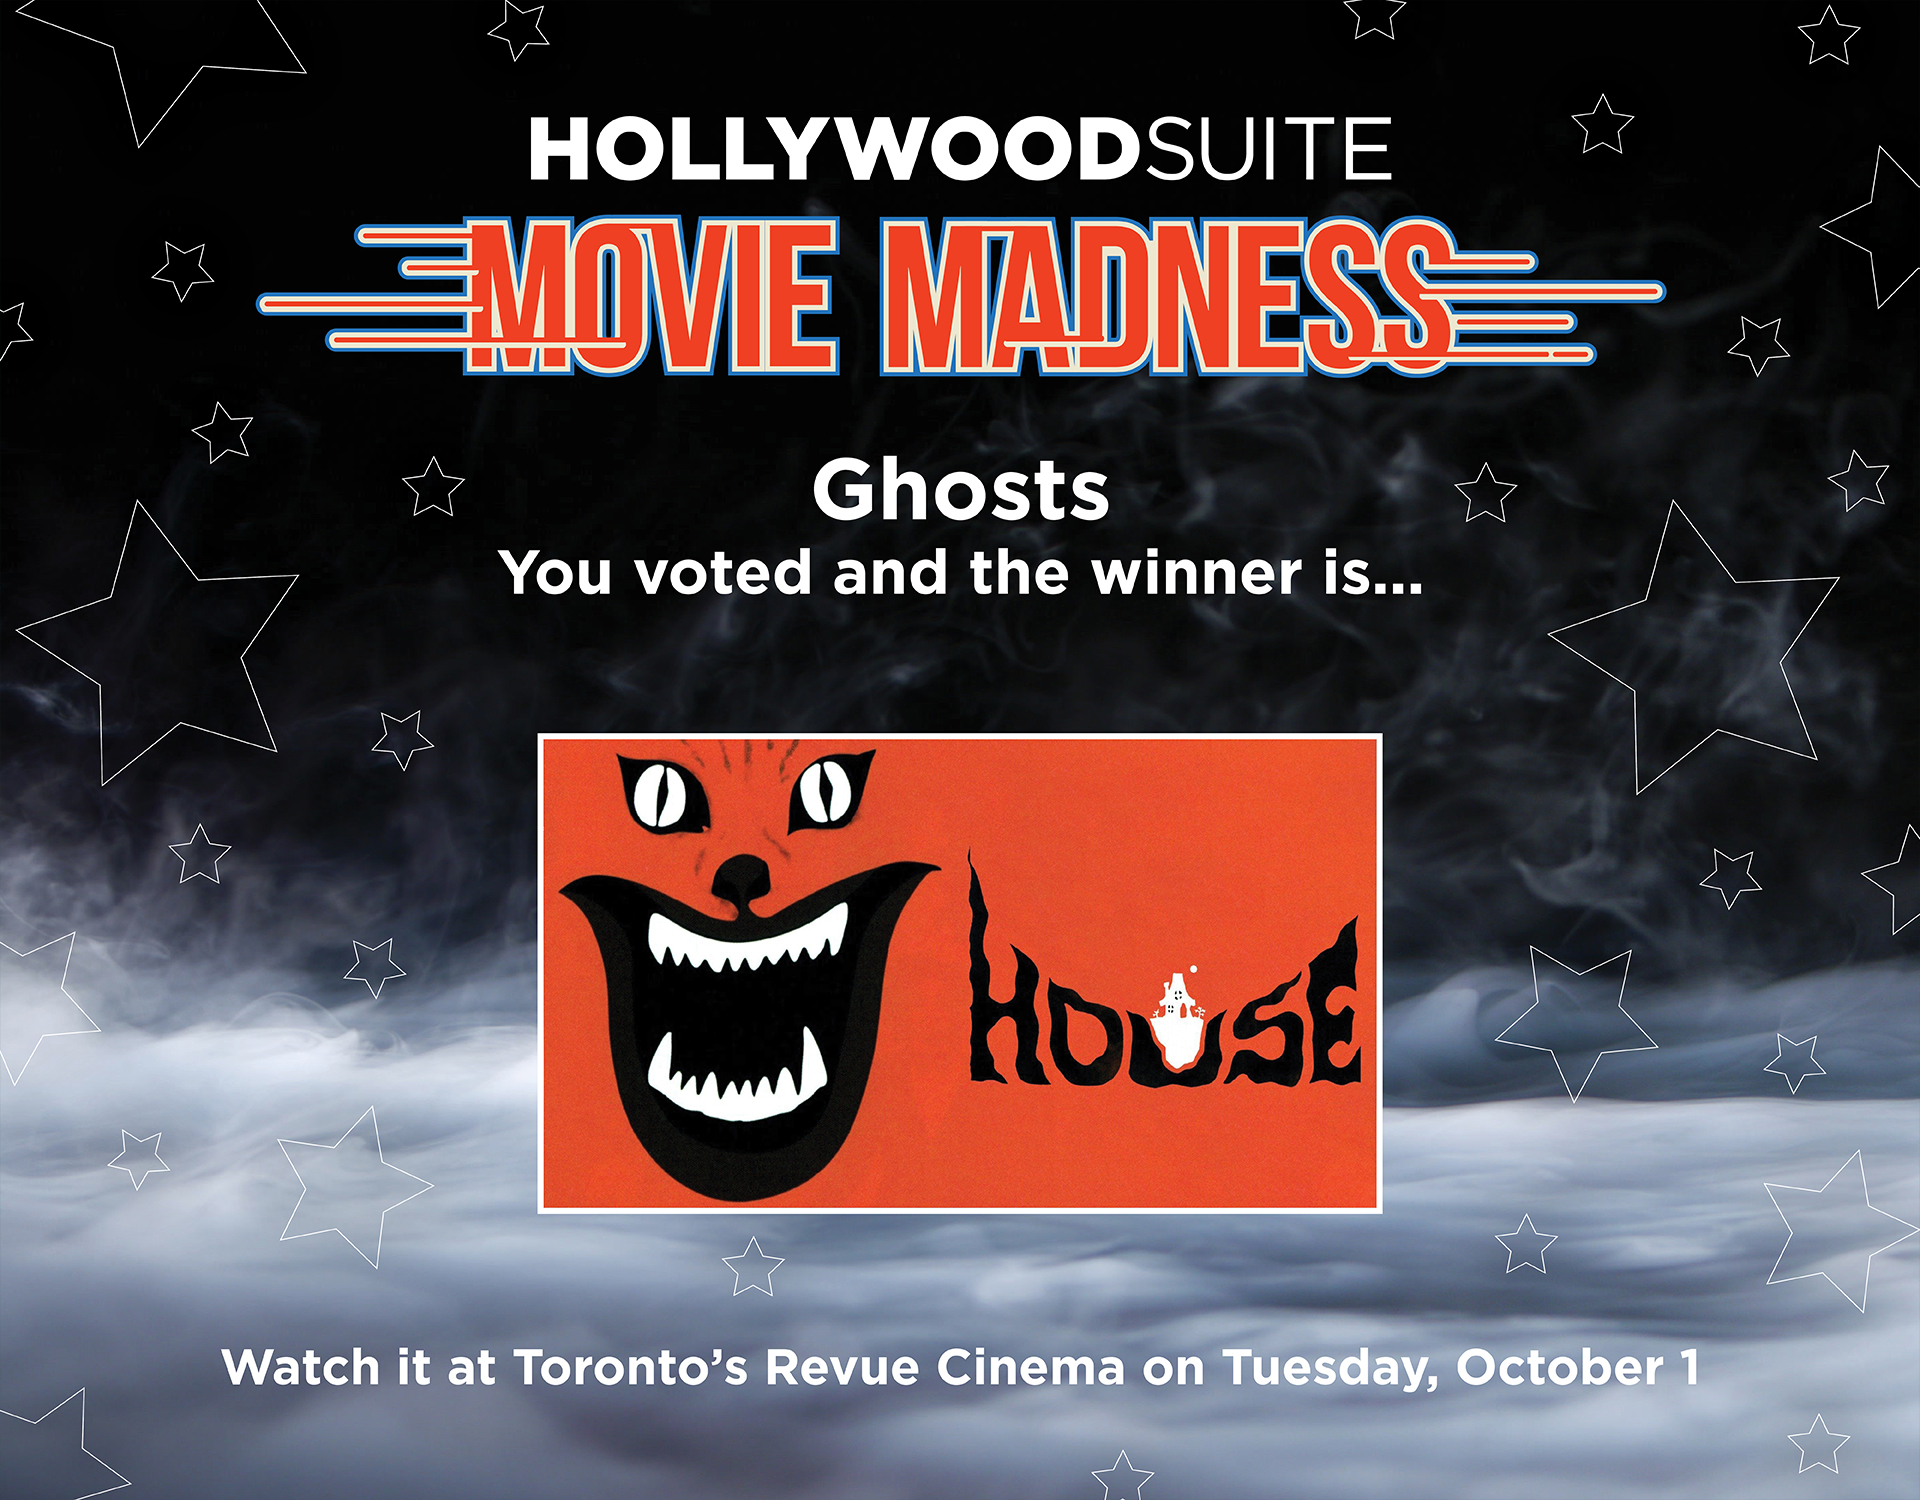 Hollywood Suite Movie Madness: Ghosts. You voted and the winner is... House. Watch it at Toronto's Revue Cinema on Tuesday, October 1